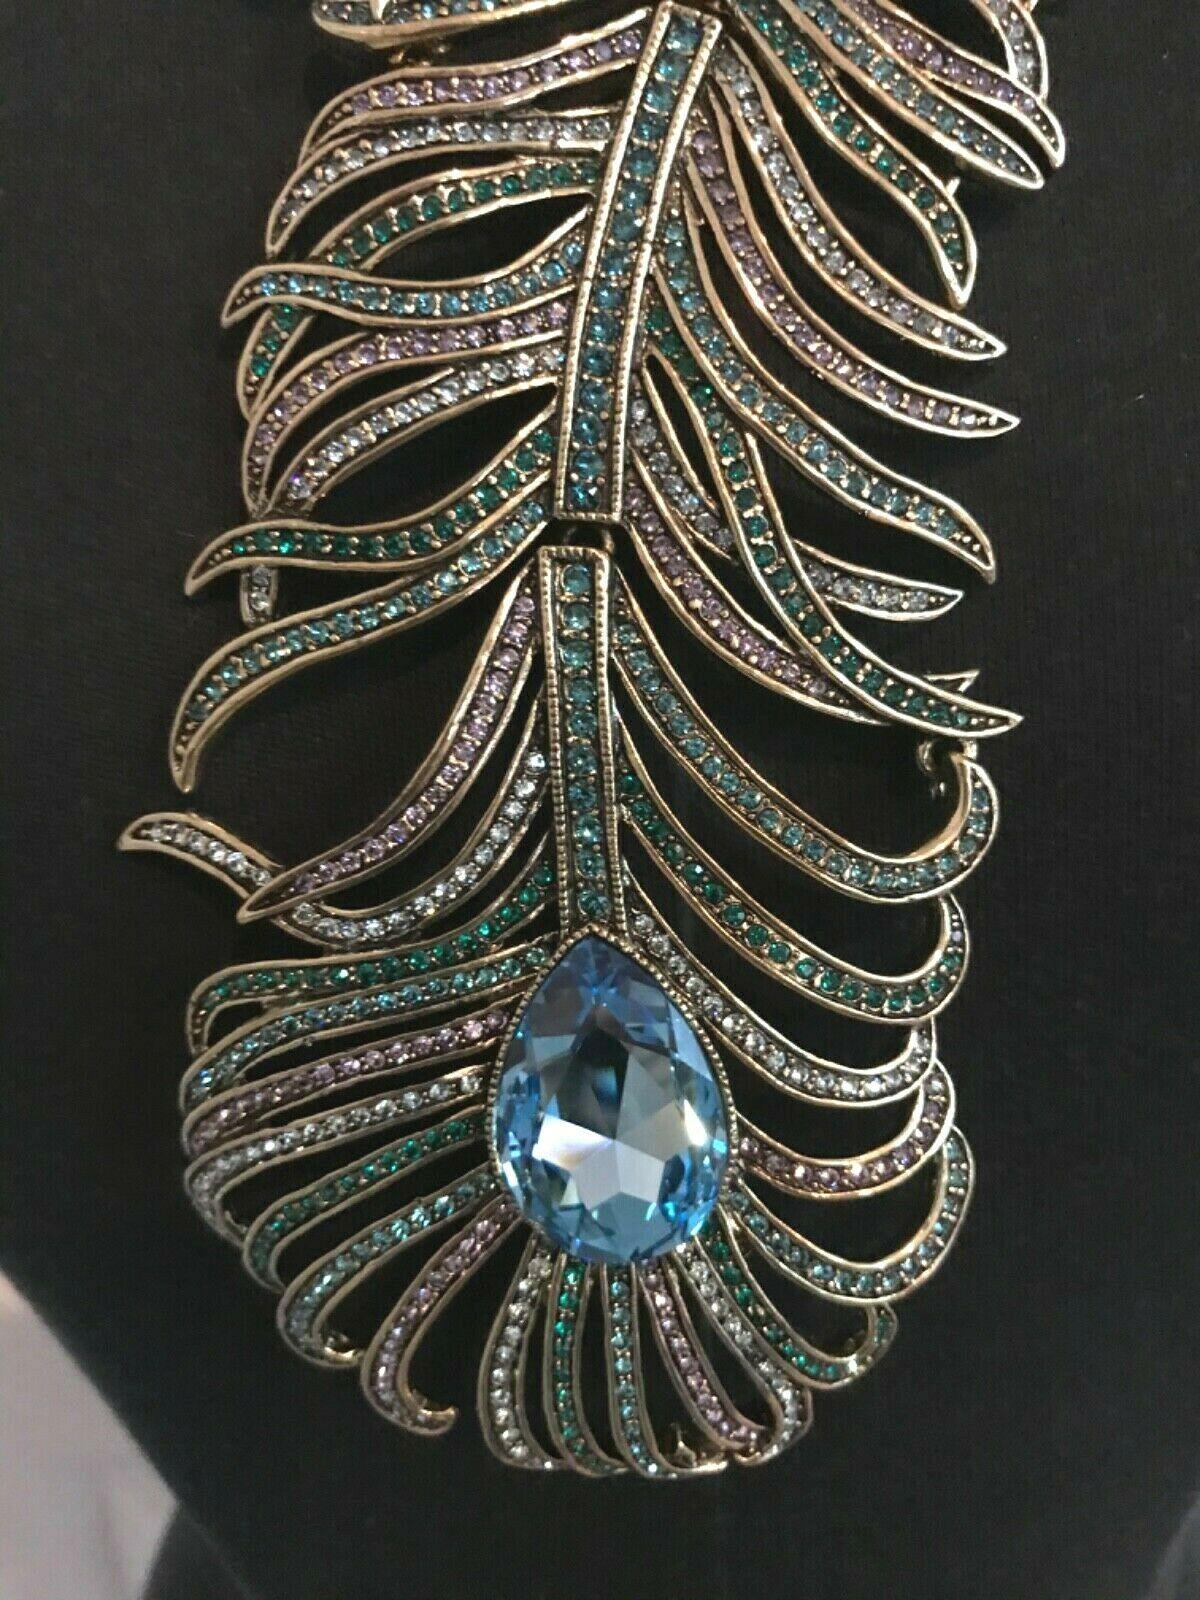 Outstanding Heidi Daus Swarovski crystal Peacock design Necklace. A single row of individually knotted Aurora Borealis Cushion cut faceted beads leads to a magnificent peacock feather designed asymmetrical station. The feather showcases a bezel set